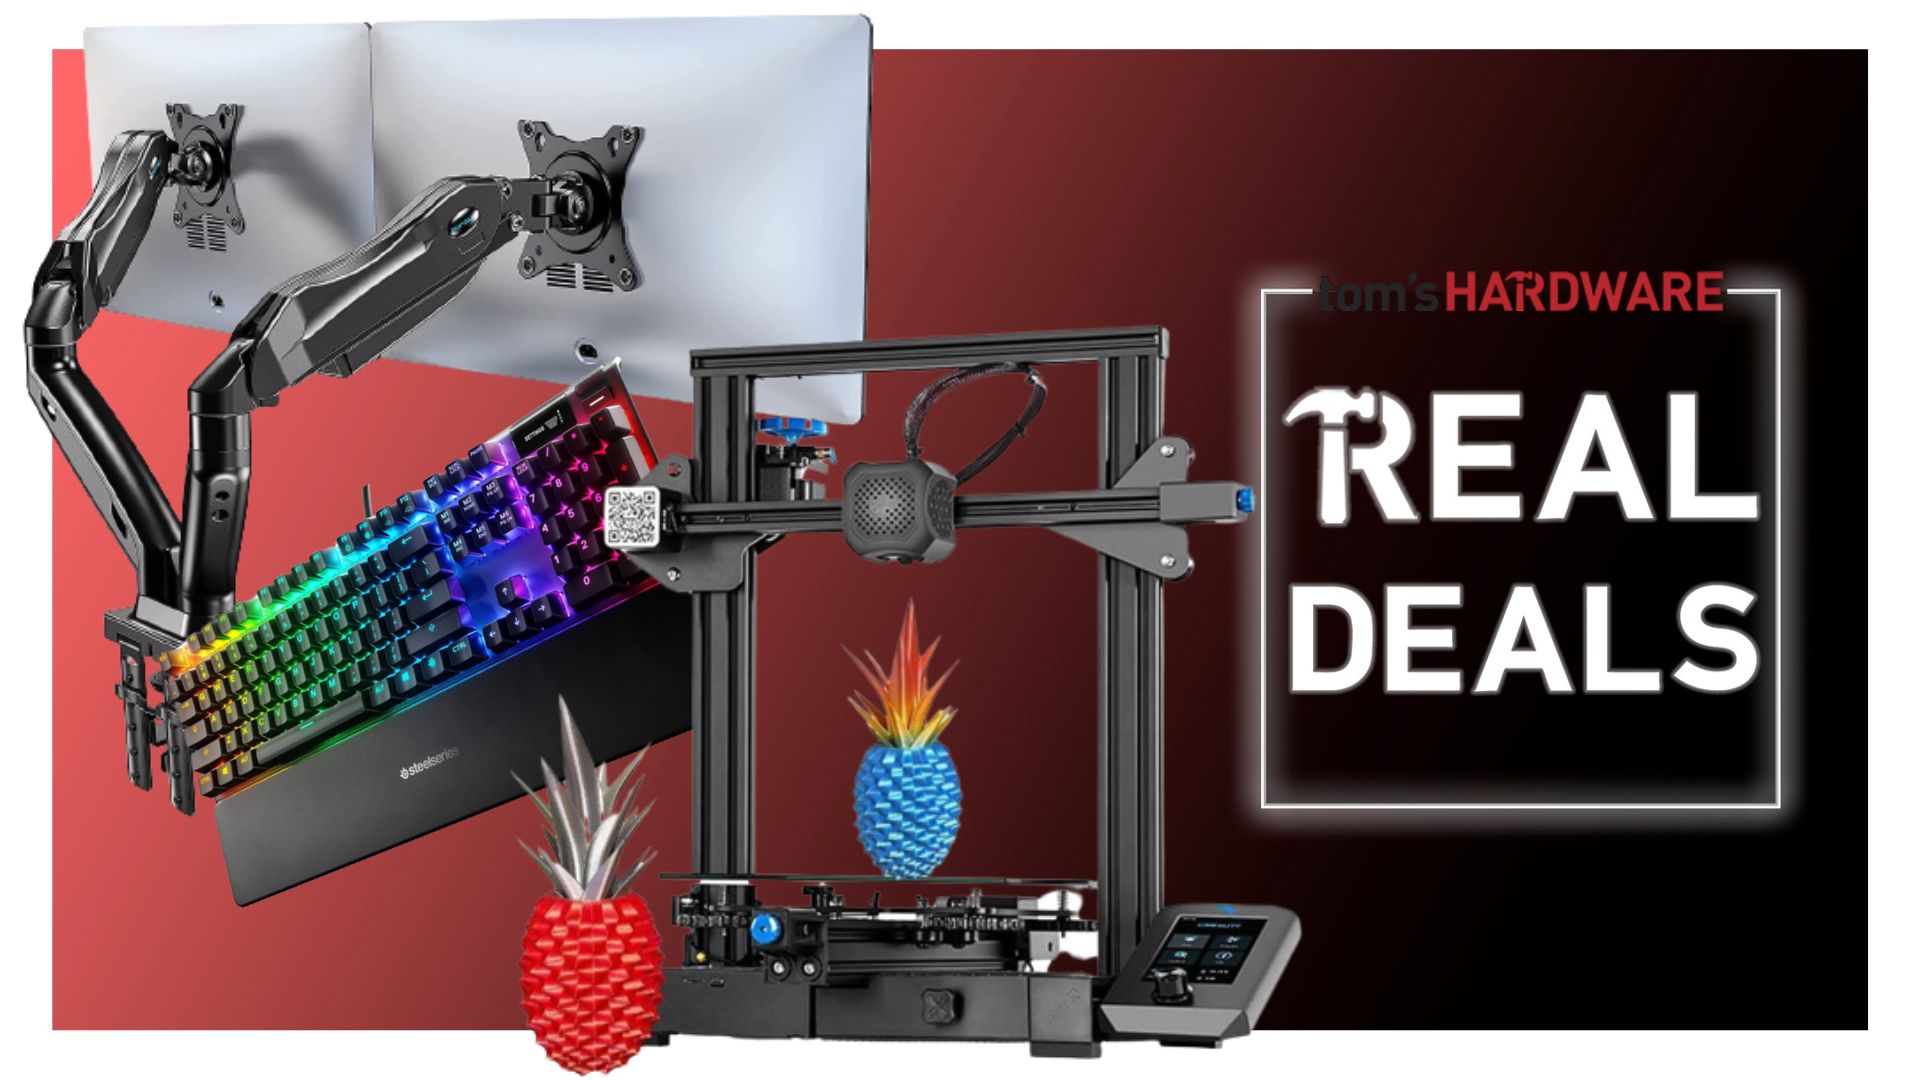 Grab a Creality Ender 3 V2 for just $199: Real Deals